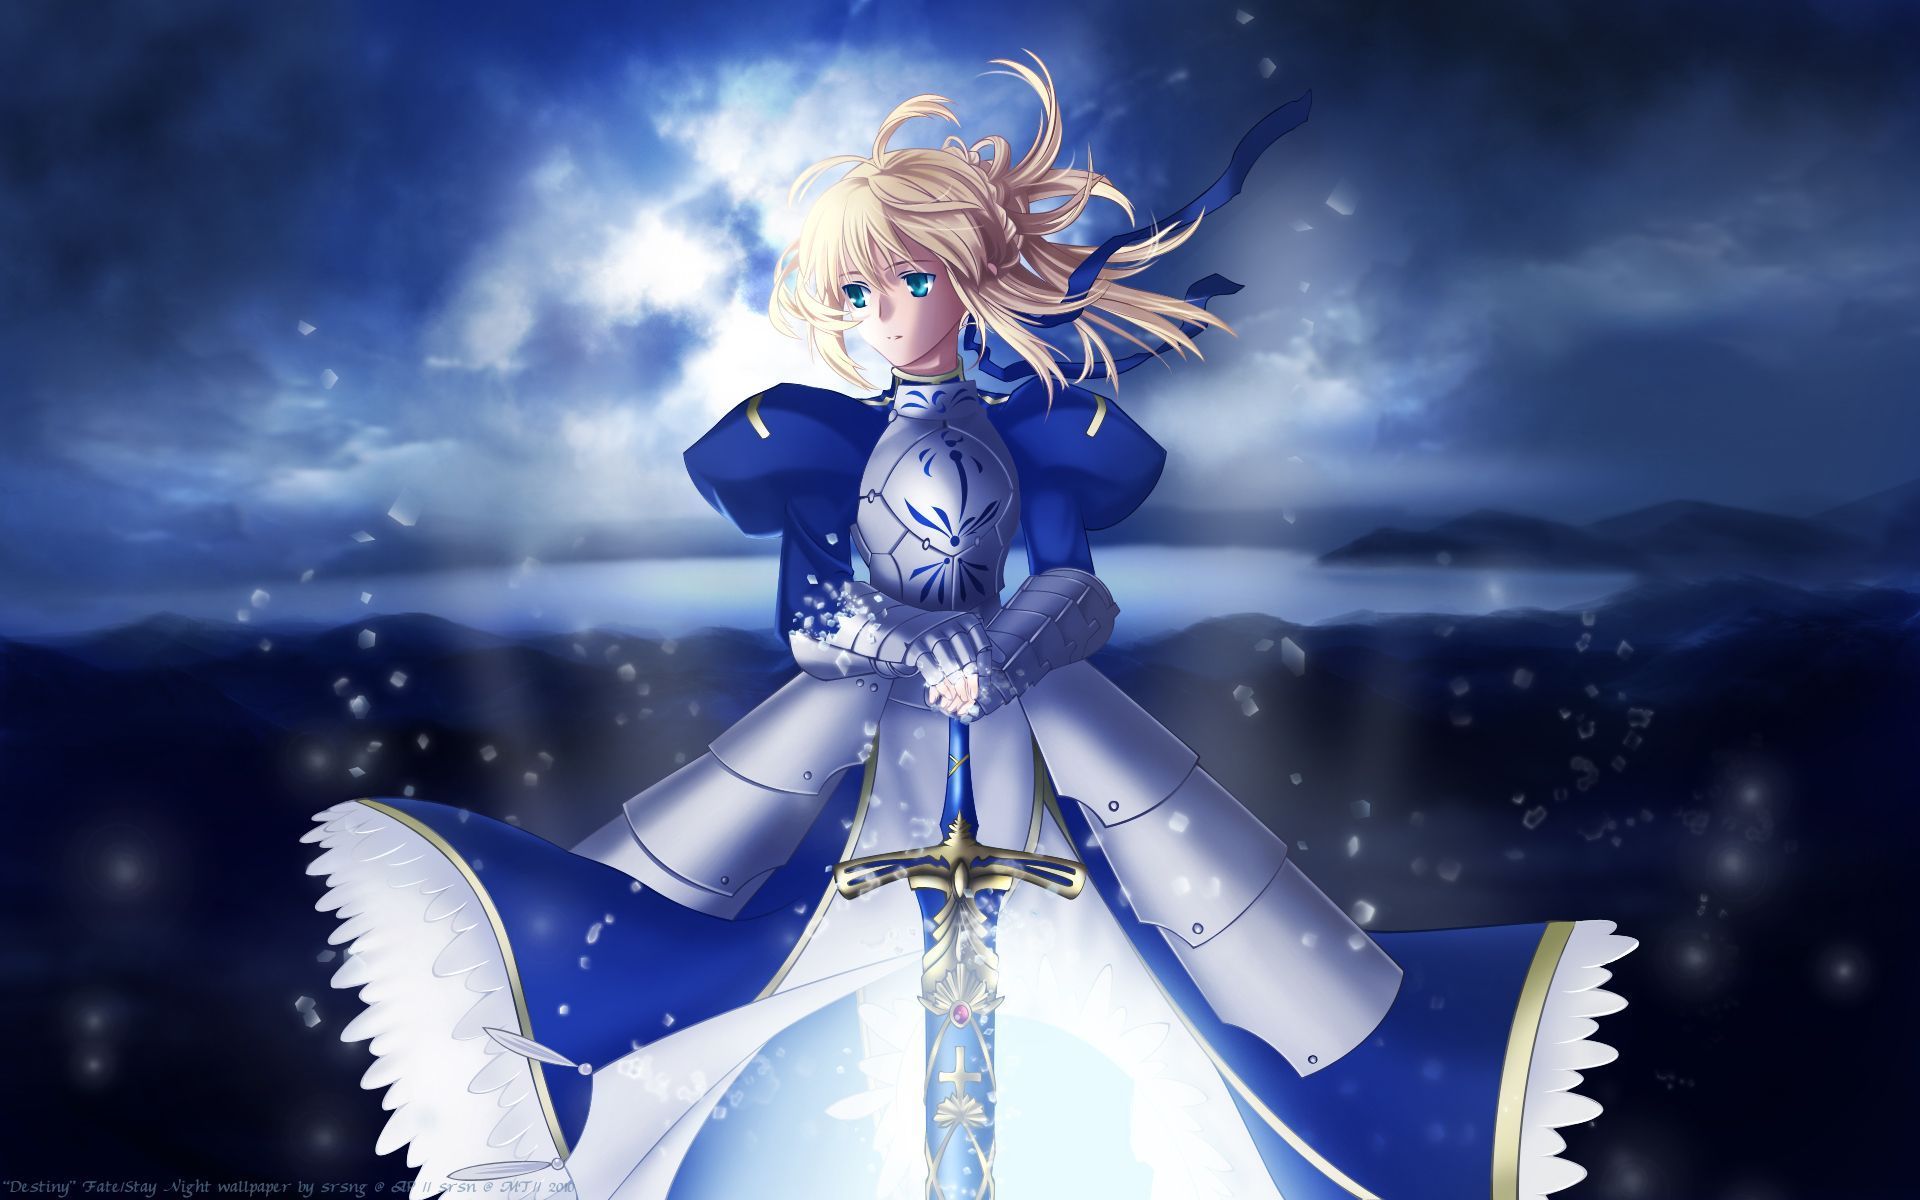 Saber (Fate/stay night), Wallpaper | page 7 - Zerochan Anime Image ...